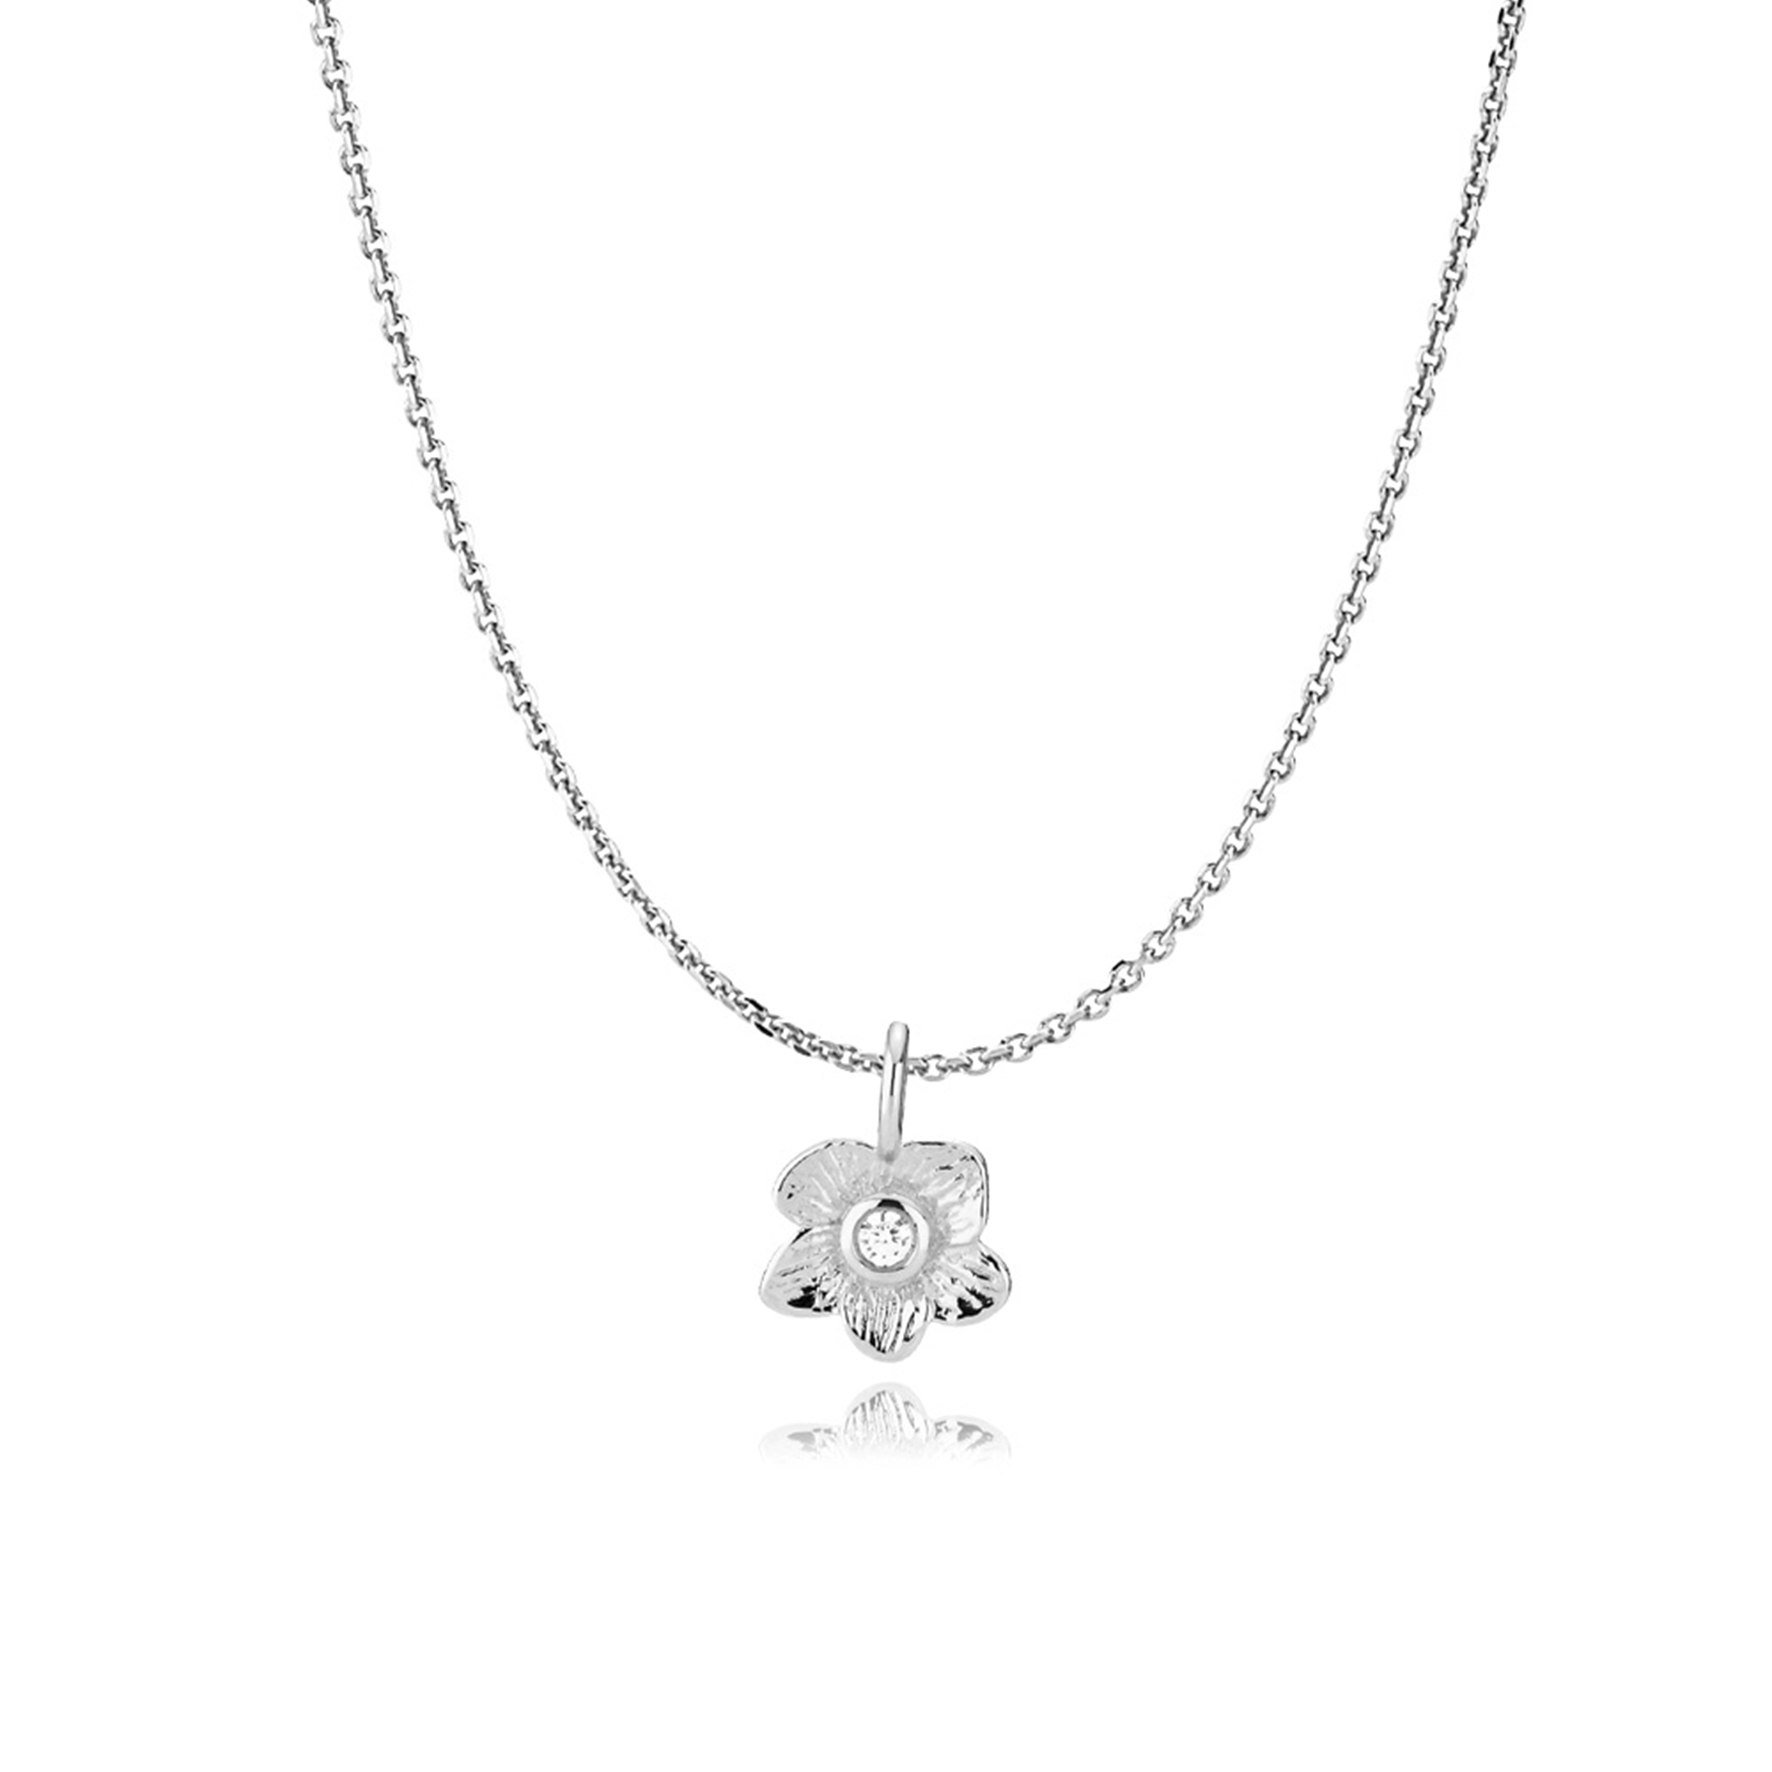 Rosa Necklace from Izabel Camille in Silver Sterling 925